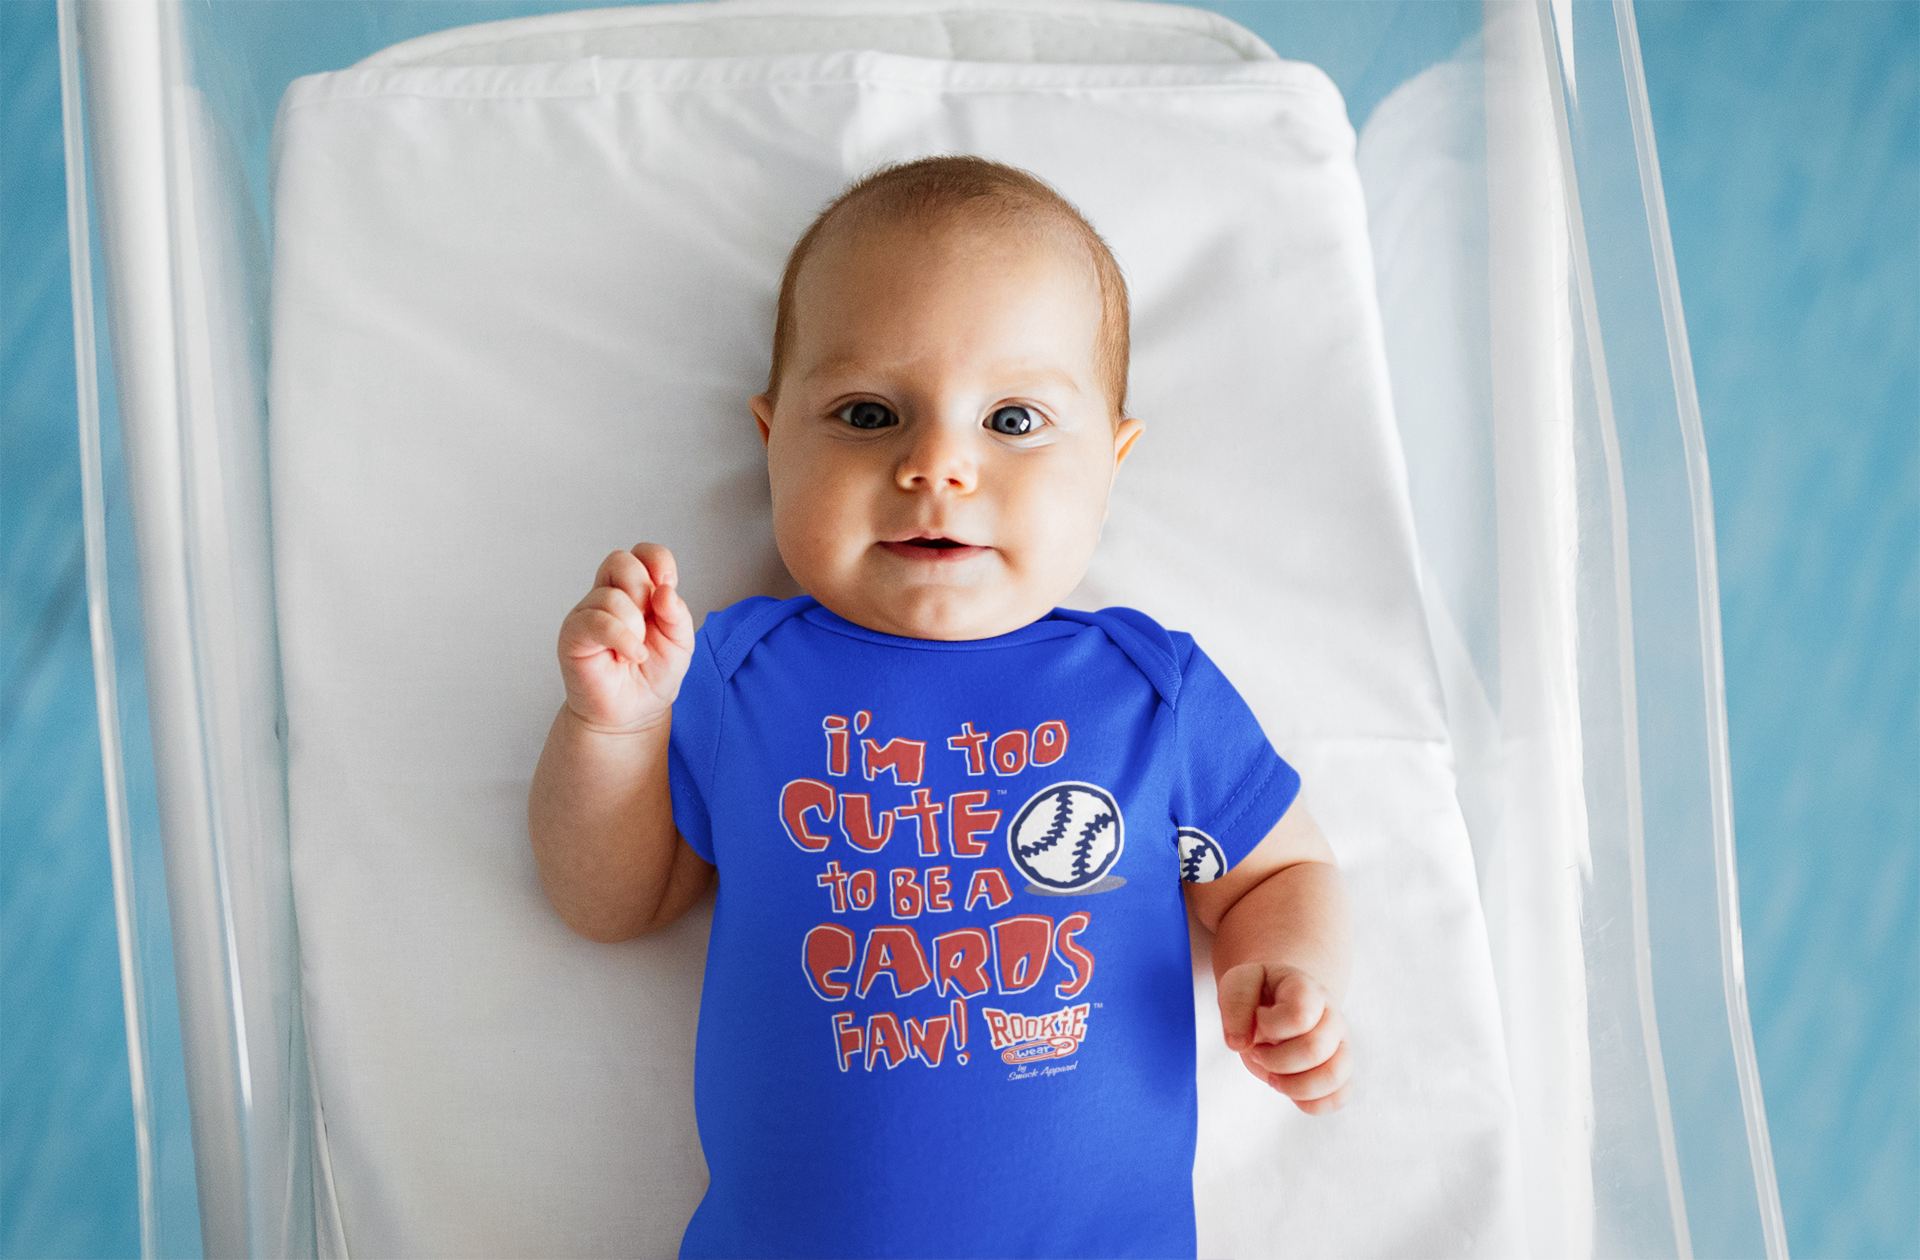 Chicago Baseball Fans. I'm Too Cute to Be A Cubs Fan (Anti-Cubs) Baby Onesie or Toddler T-Shirt NB / Black